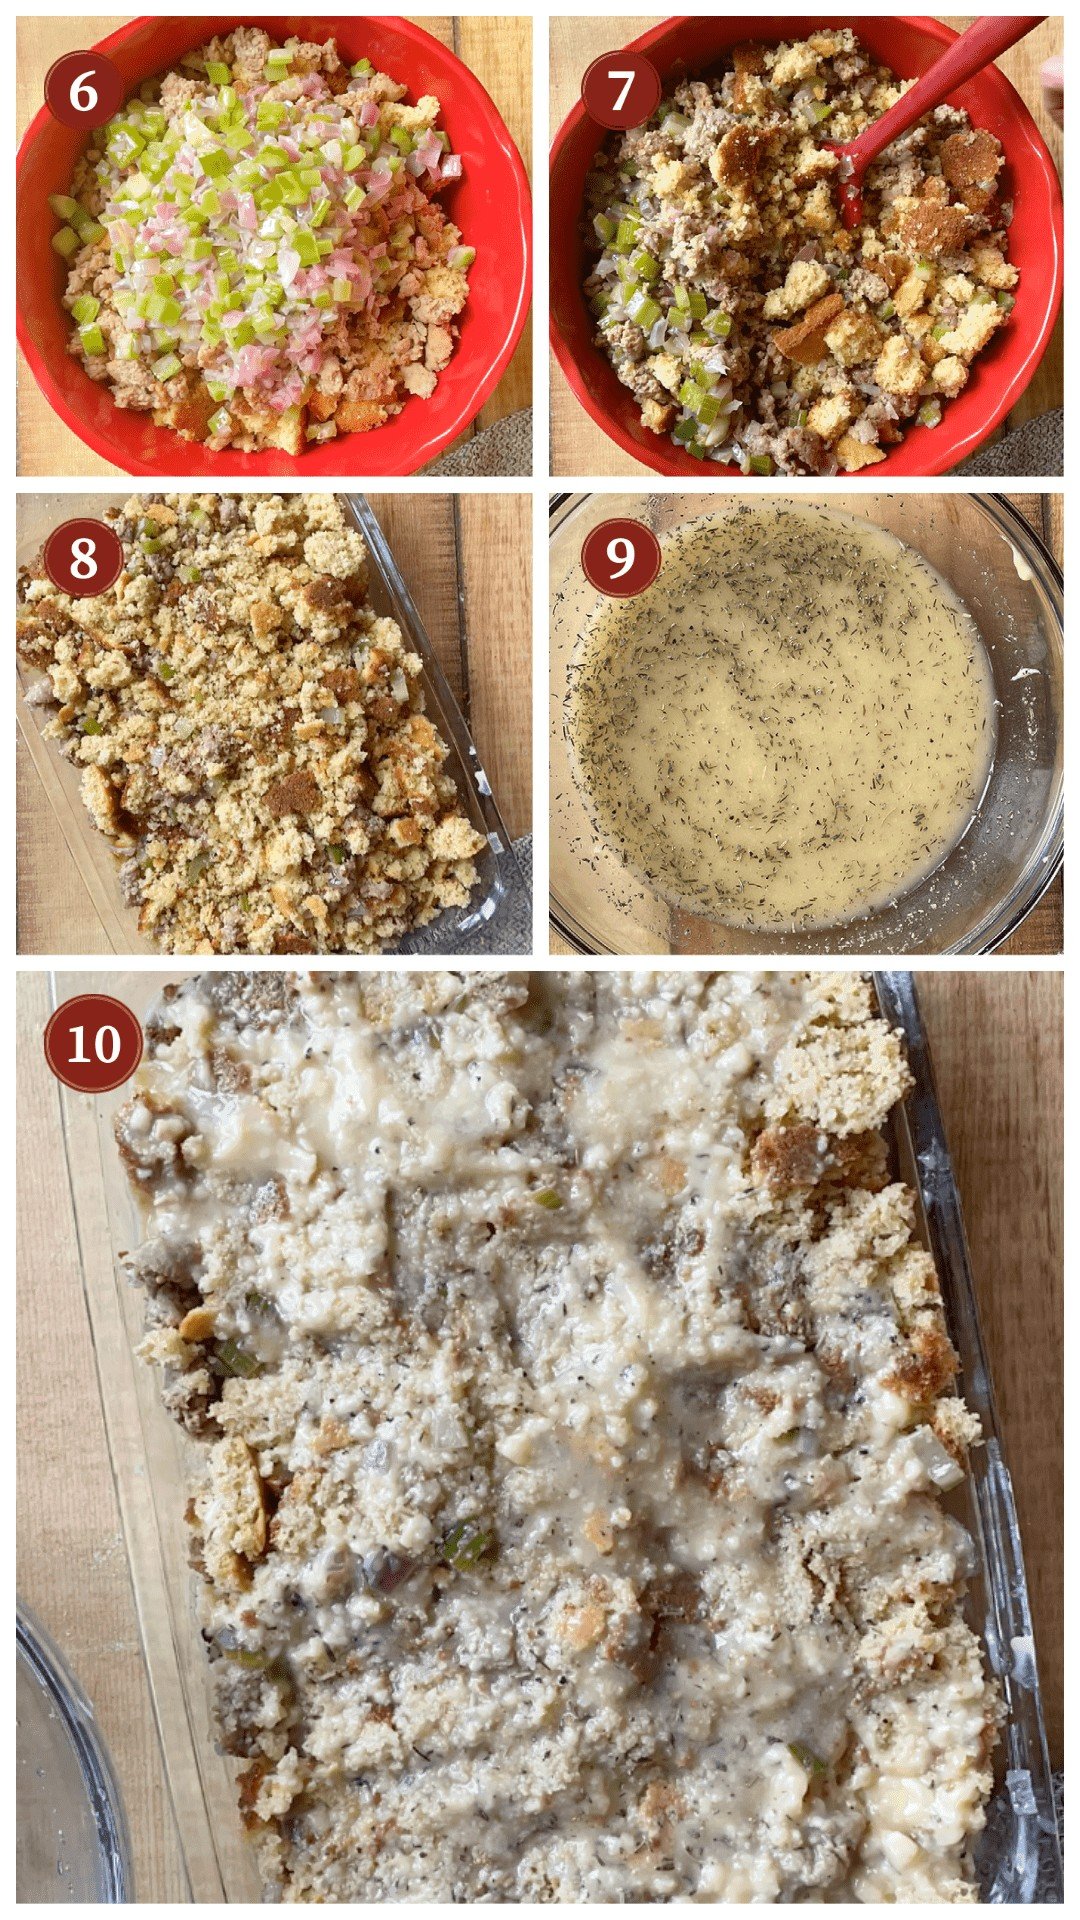 A collage of images showing how to make southern cornbread dressing, steps 6 - 10.